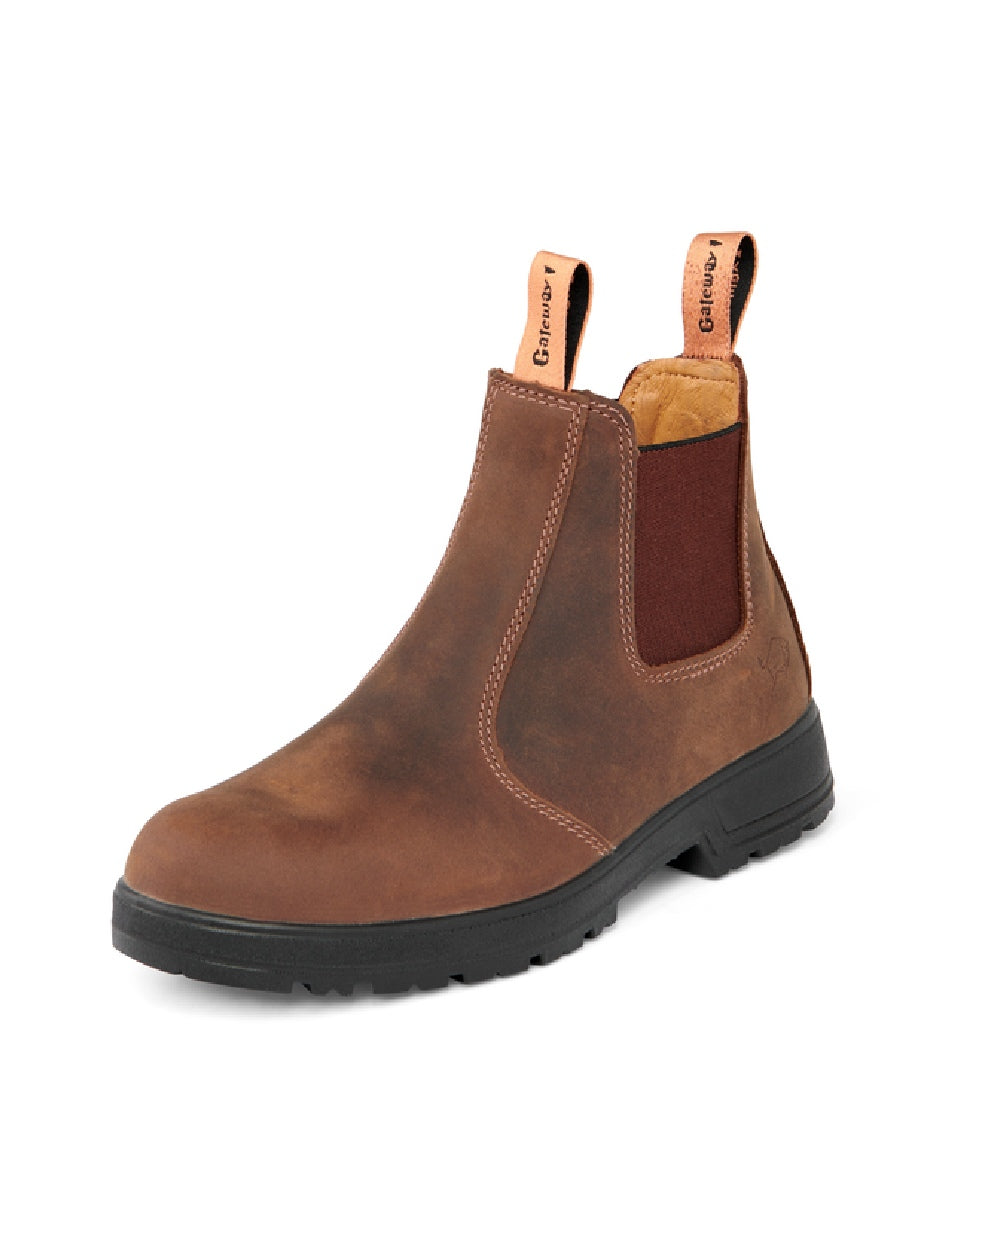 GateWay 1 SD 6 Pull-on Chelsea Boots in Dark Brown 